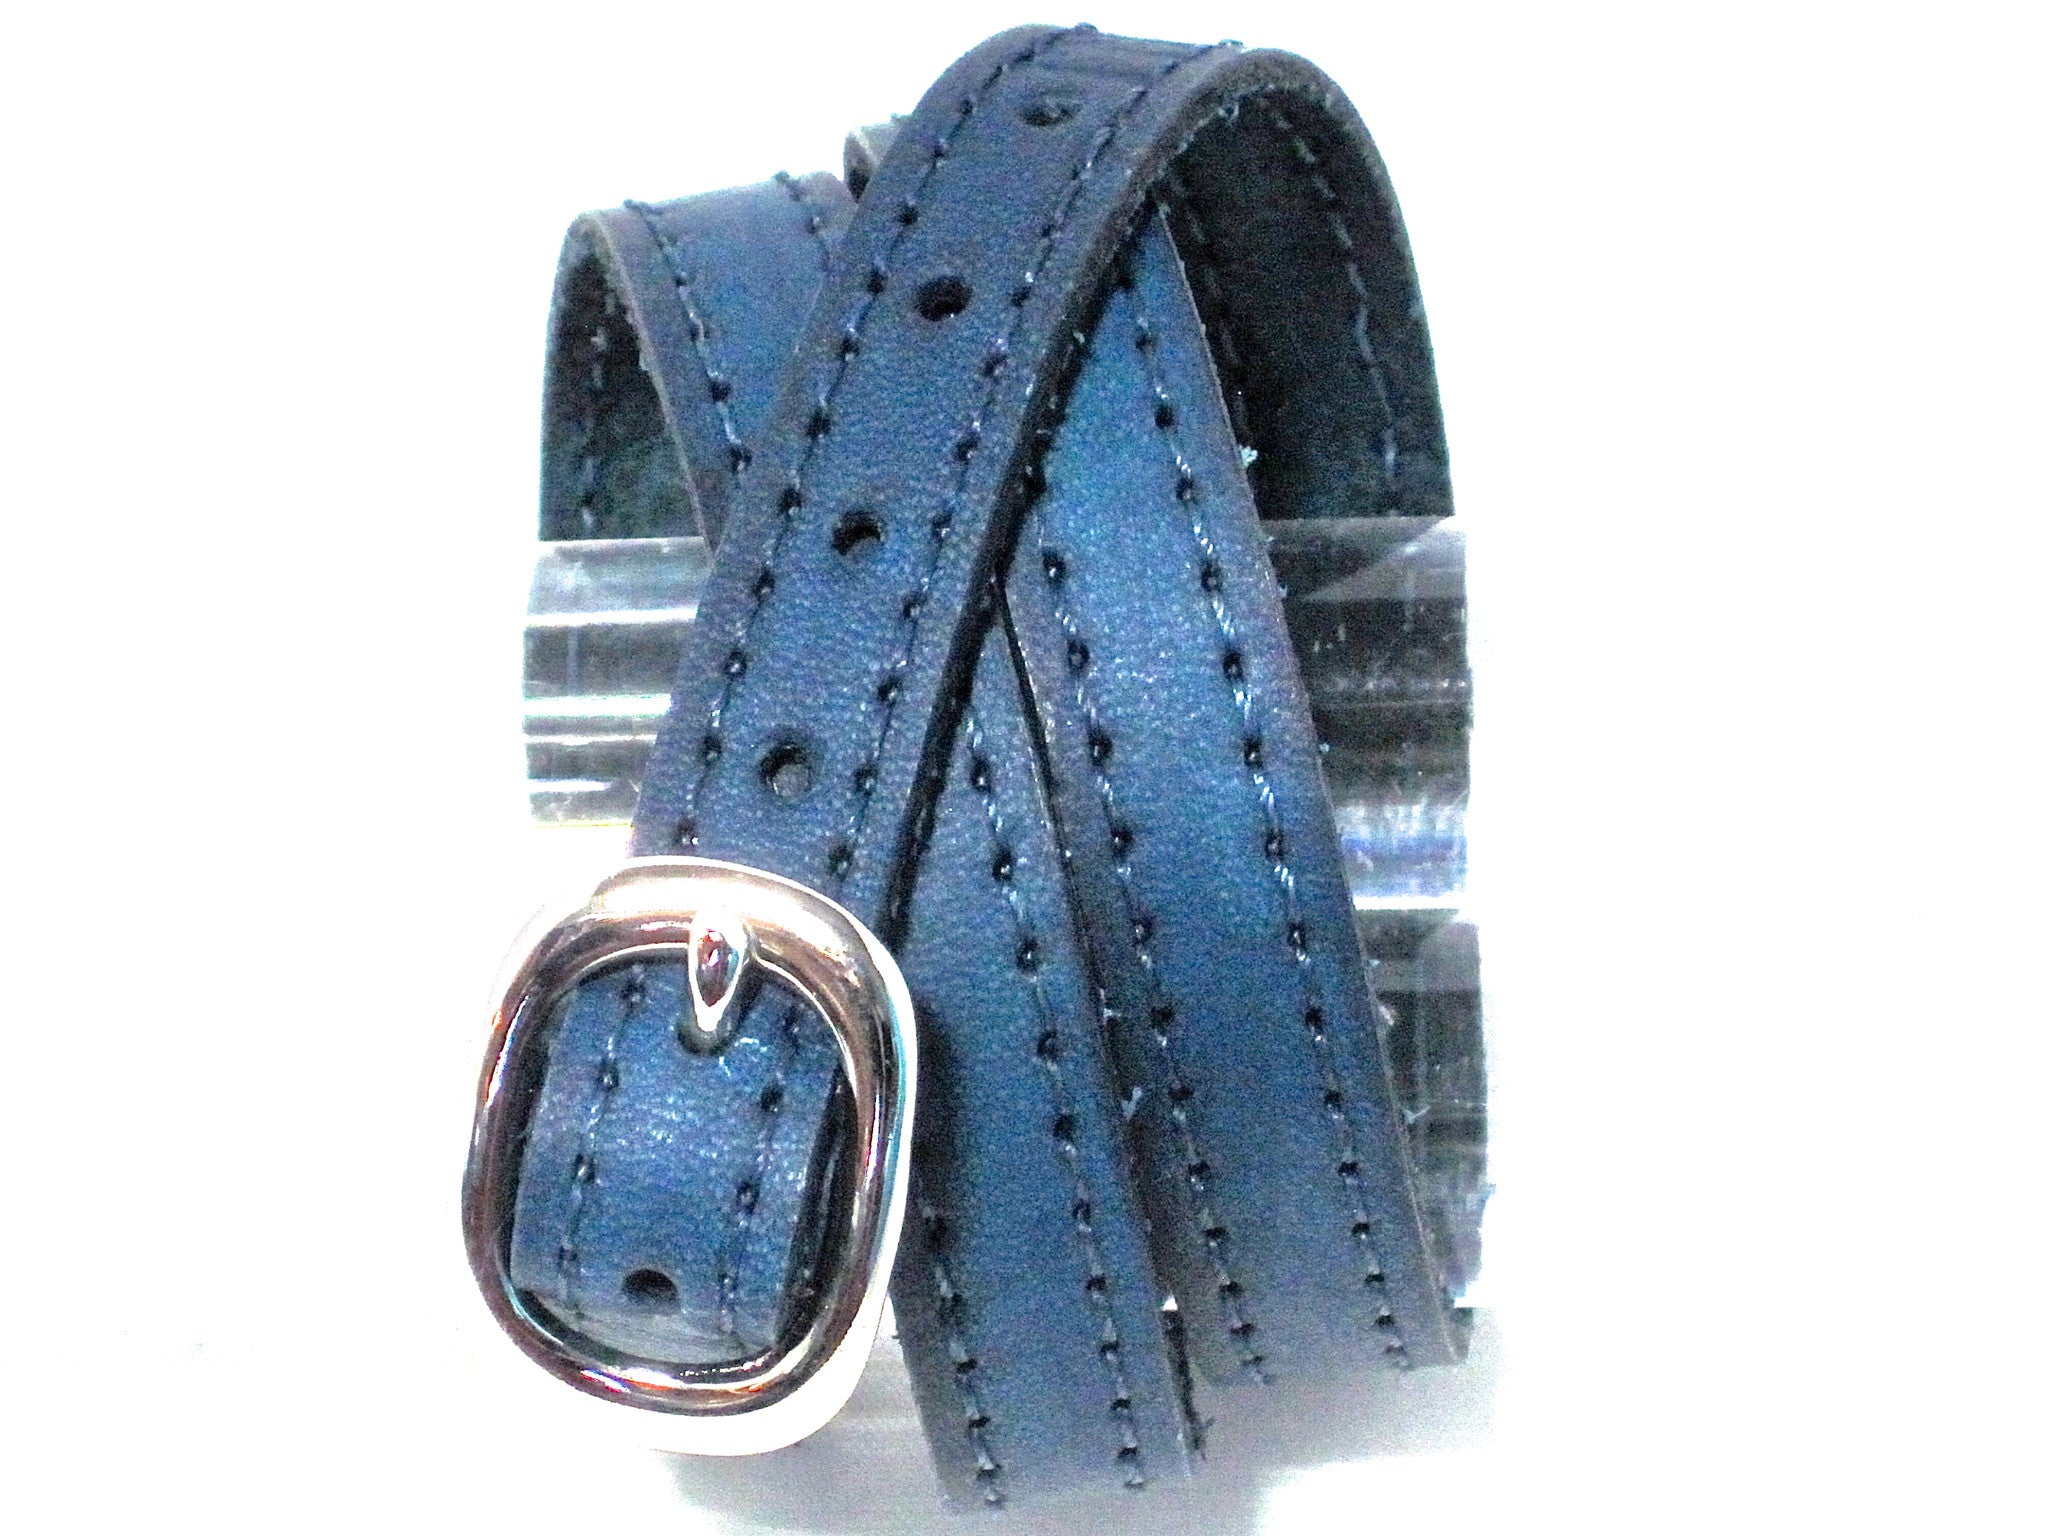 TRIPLE WRAPAROUND LEATHER BRACELET WITH COACHMAN LOOP AND TWISTED ANCHOR SHACKLE  by nyet jewelry.